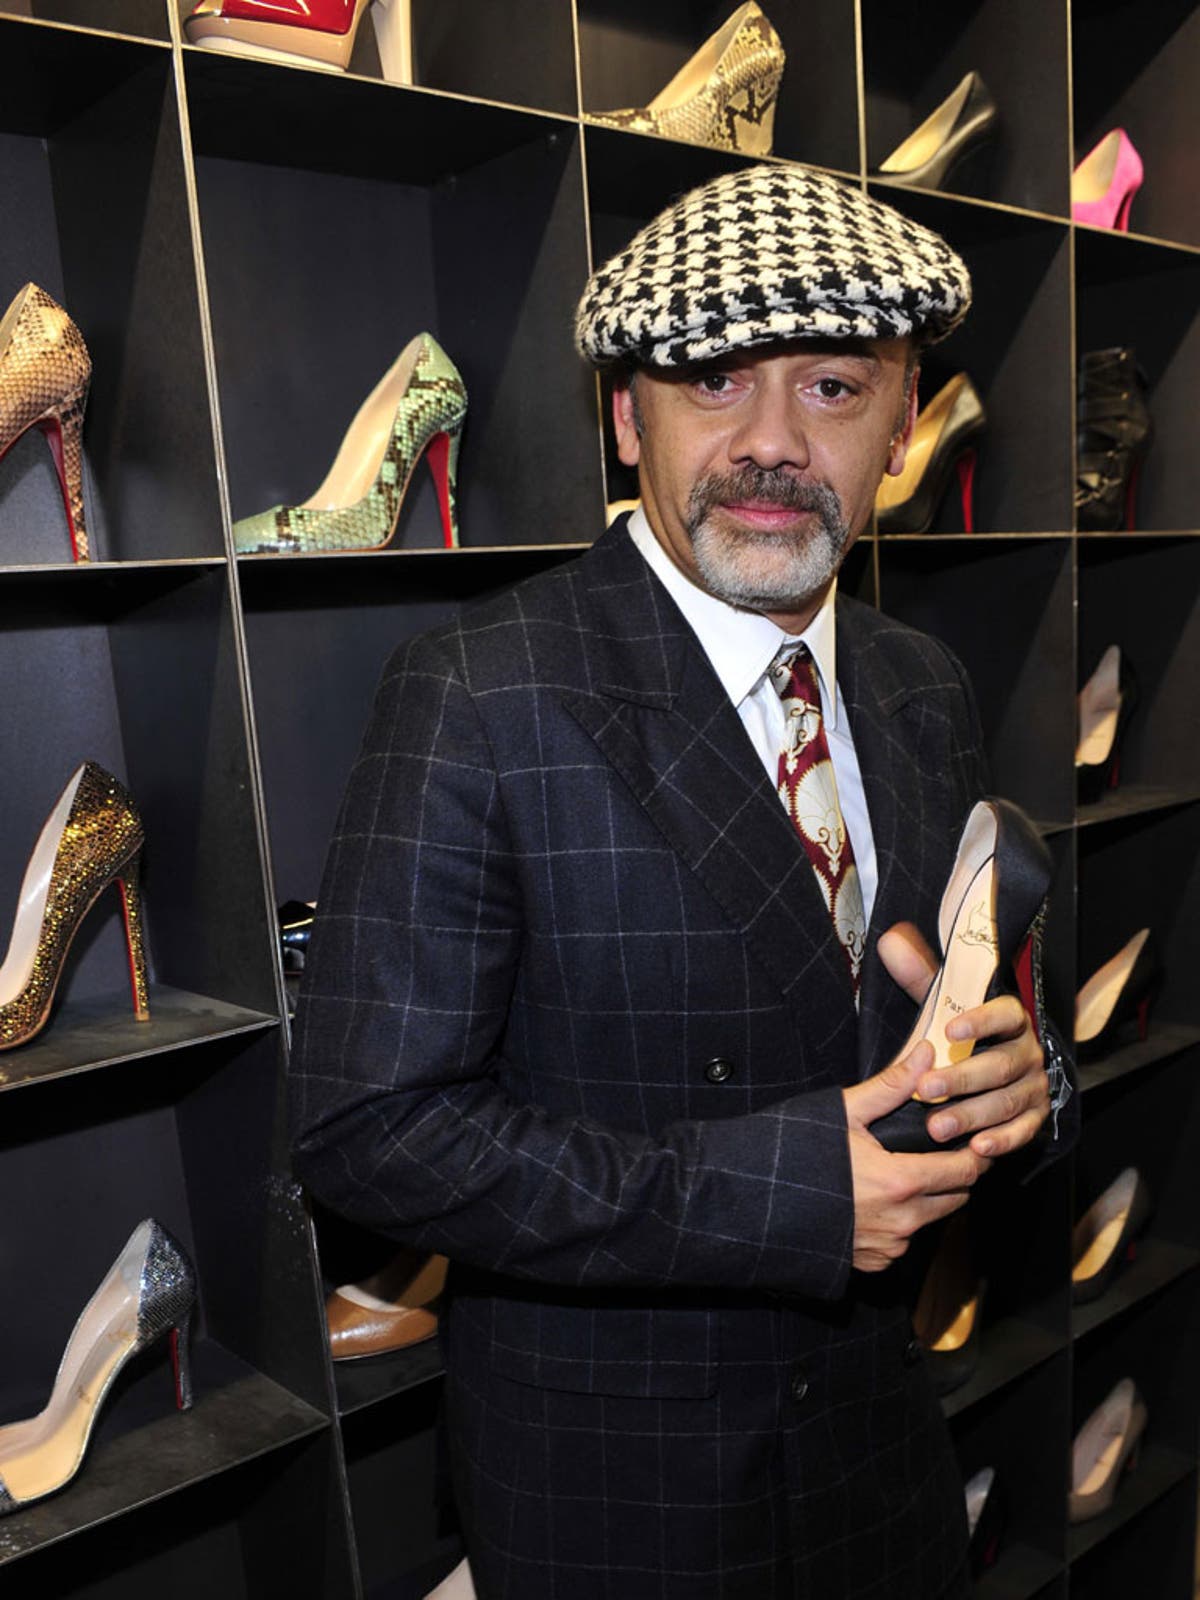 7 Things You Need To Know About Louboutin High Heels